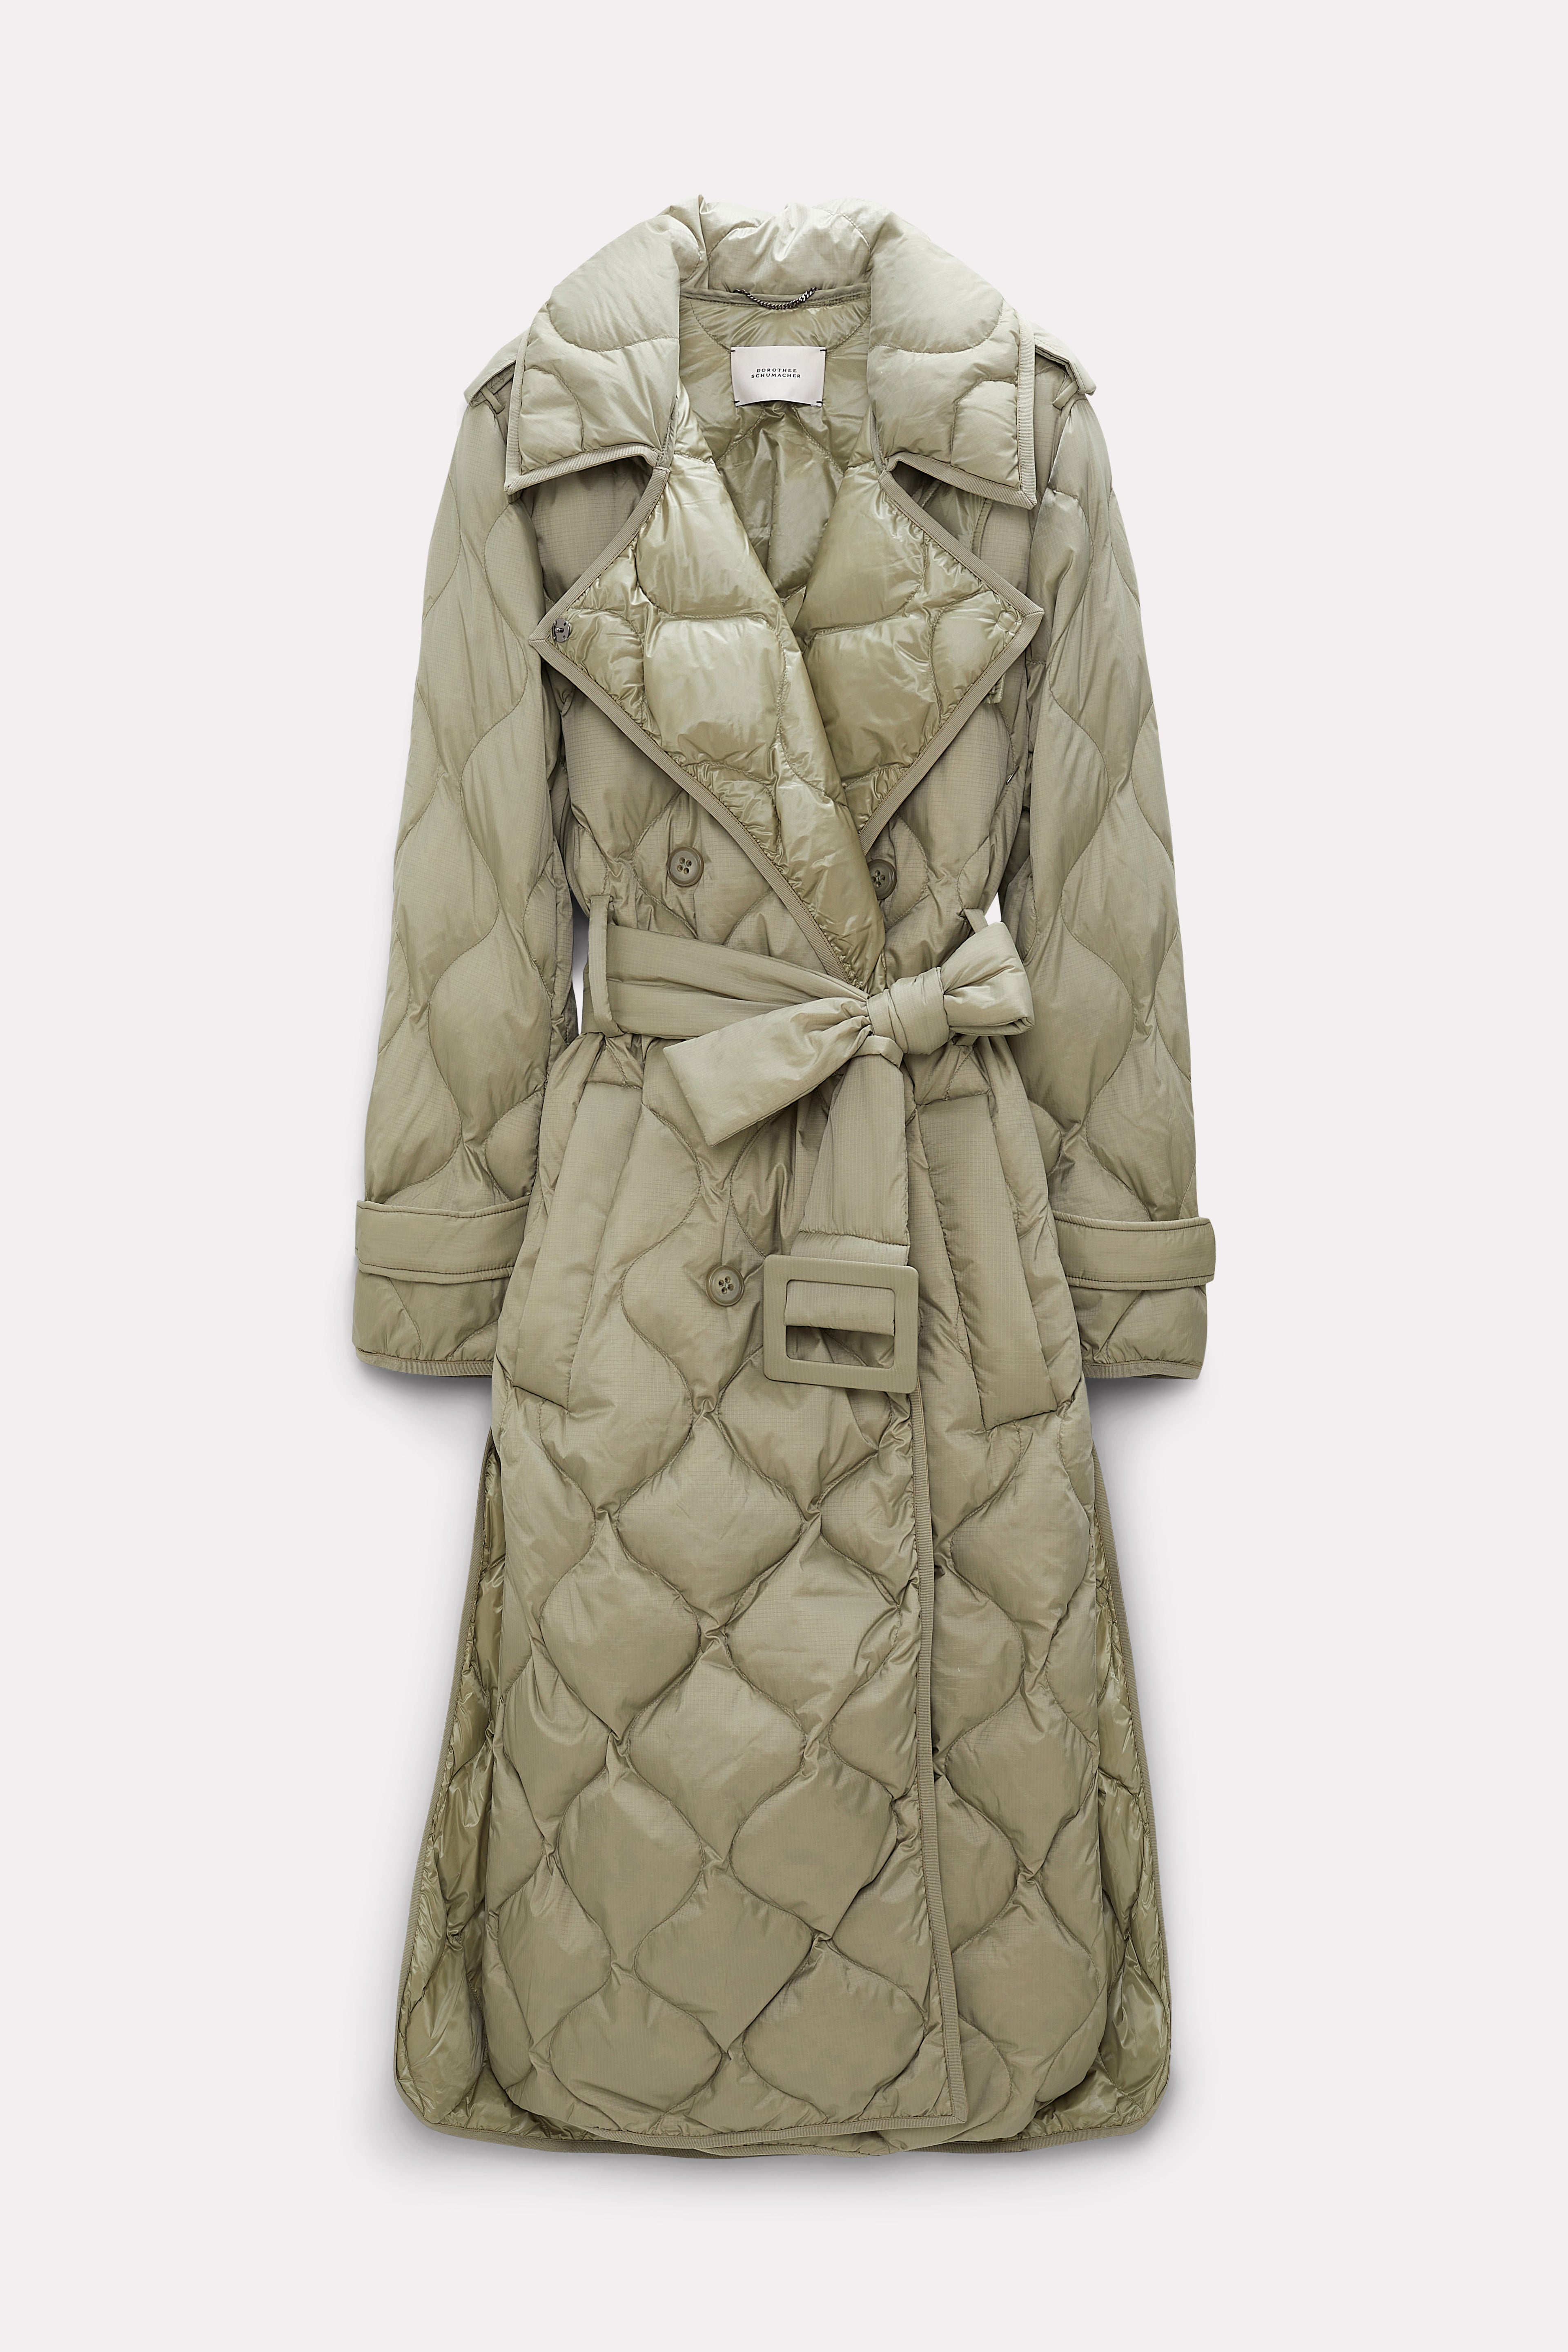 Dorothee-Schumacher-OUTLET-SALE-COZY-COOLNESS-trench-Jacken-Mantel-ARCHIVE-COLLECTION.jpg